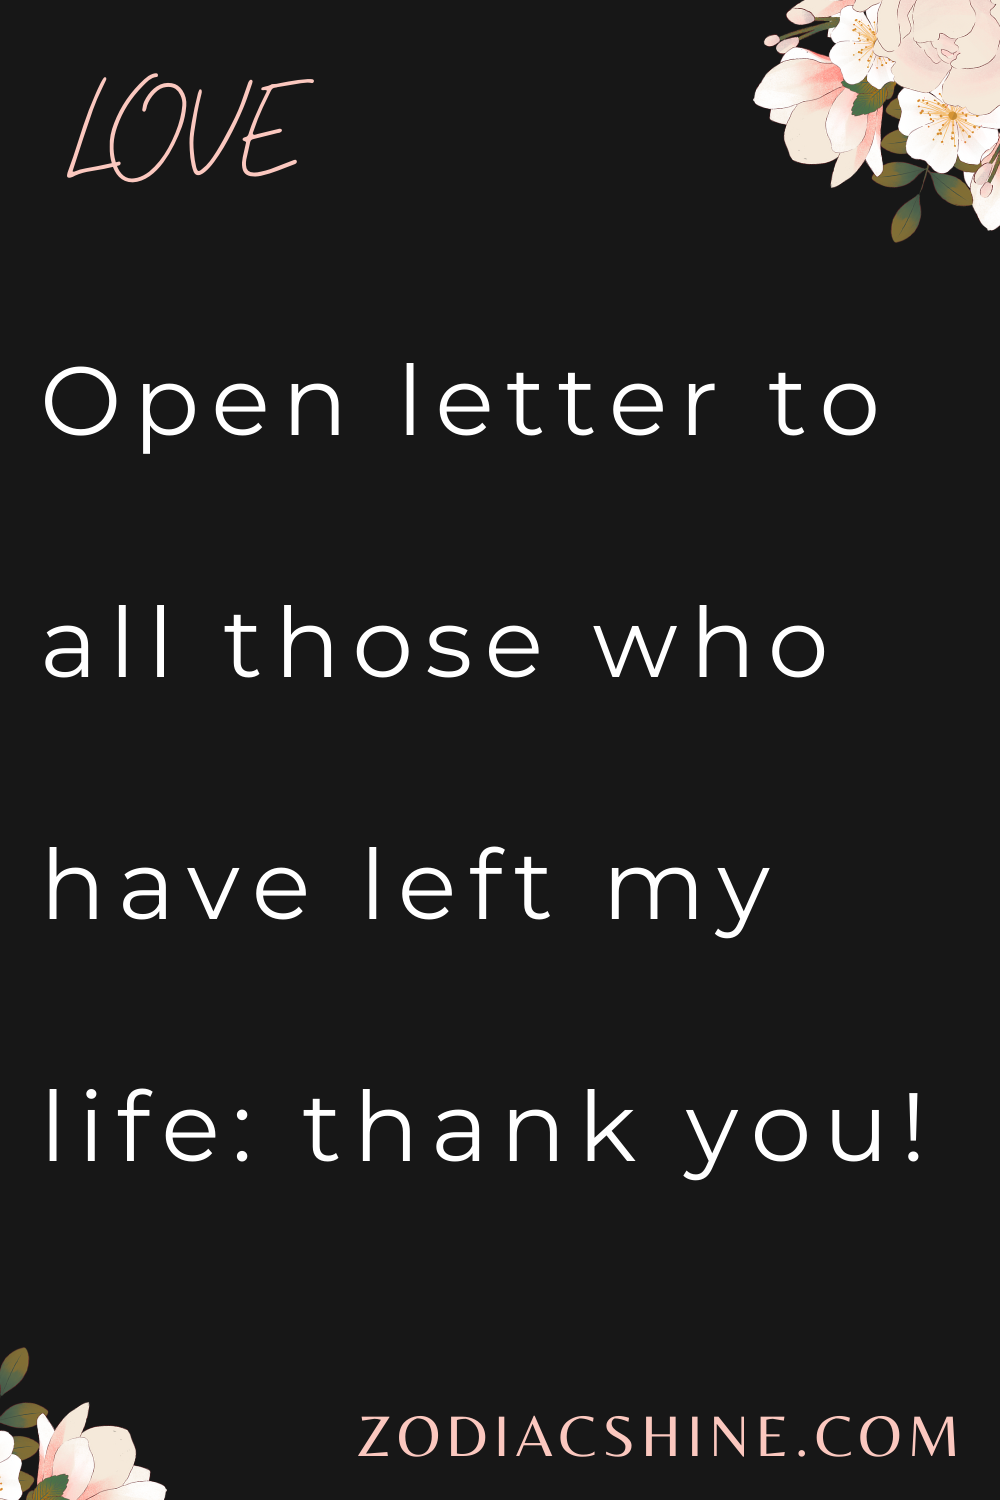 Open letter to all those who have left my life: thank you!